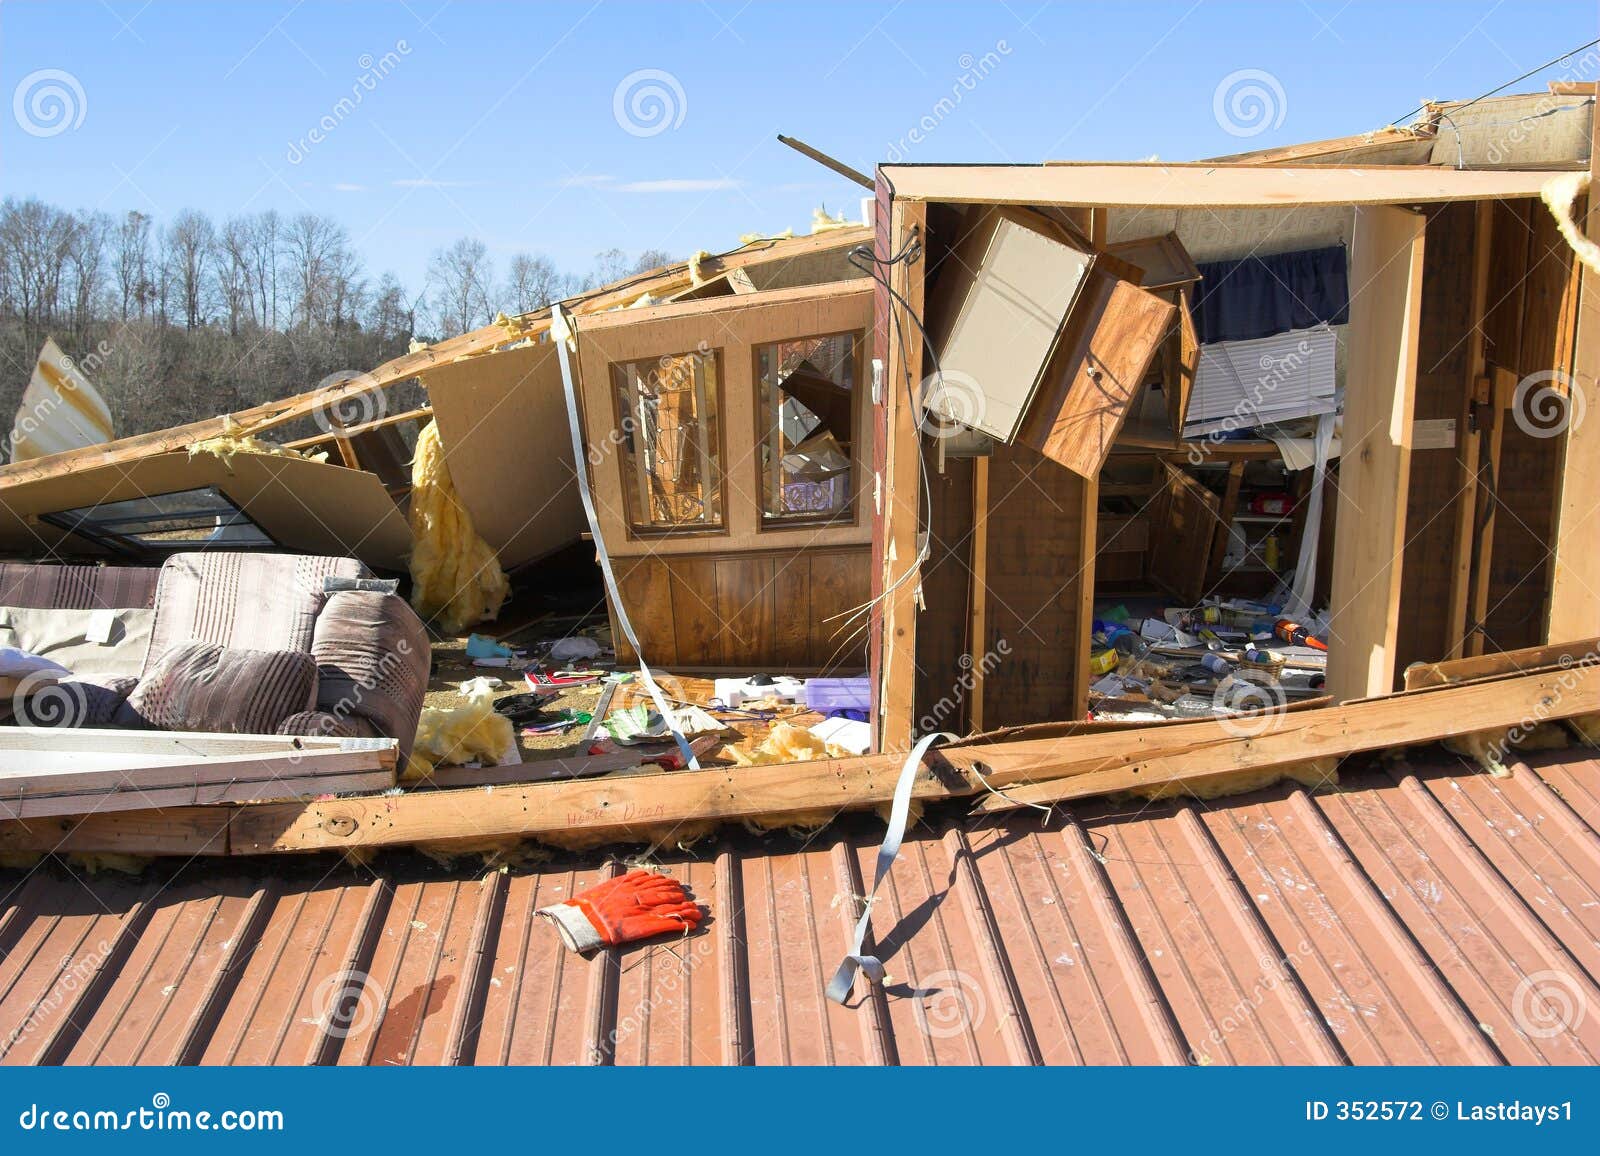 destroyed house clipart - photo #35